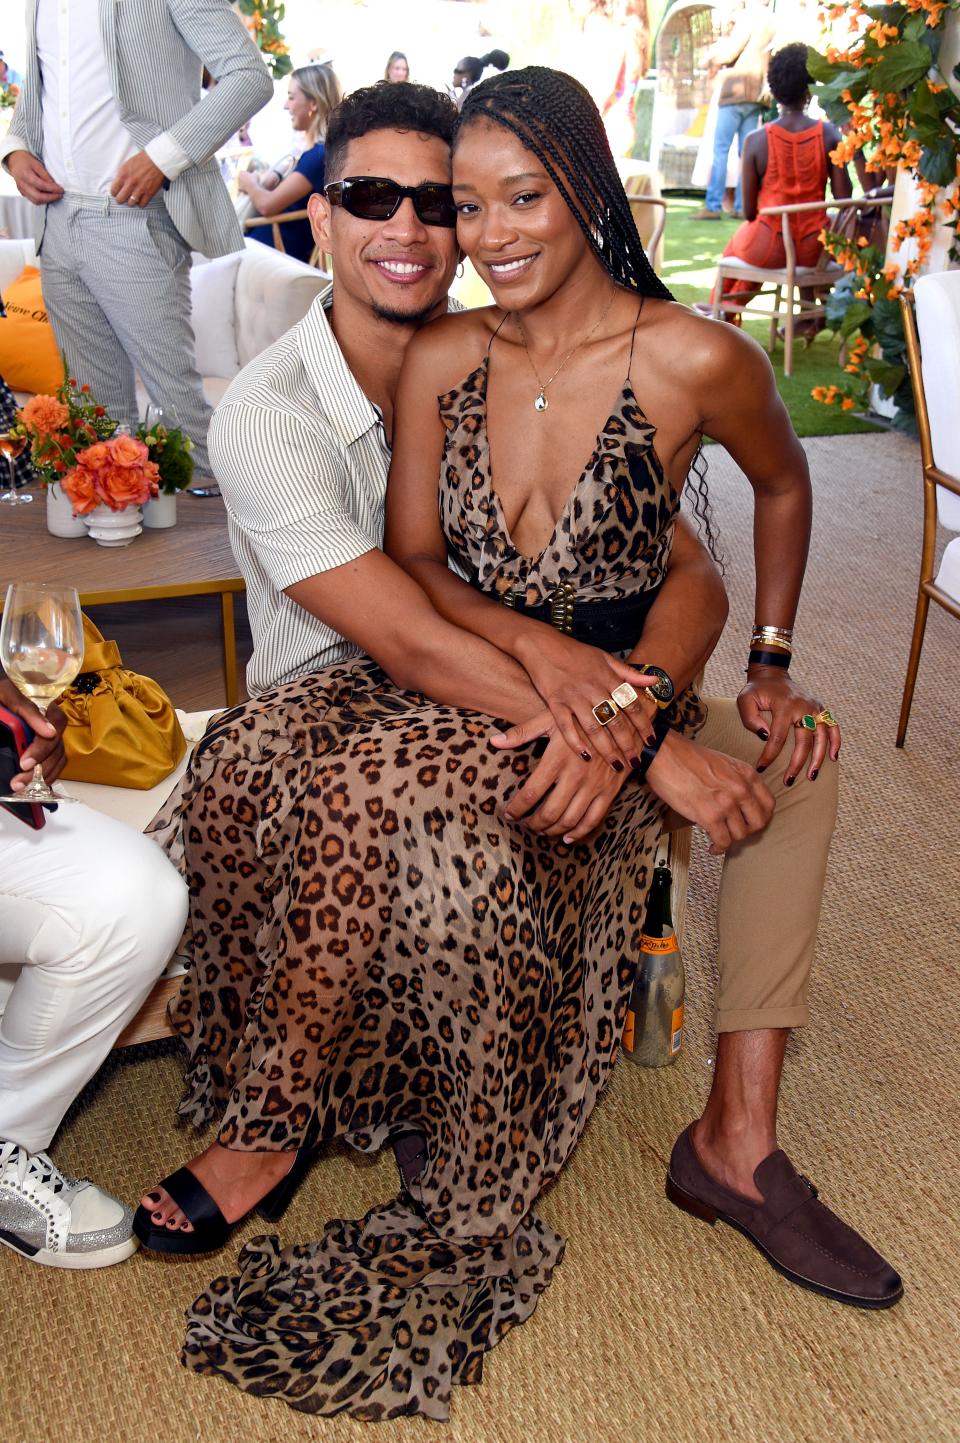 PACIFIC PALISADES, CALIFORNIA - OCTOBER 02: (L-R) Darius Daulton Jackson and Keke Palmer attend the Veuve Clicquot Polo Classic Los Angeles at Will Rogers State Historic Park on October 02, 2021 in Pacific Palisades, California. (Photo by Gregg DeGuire/Getty Images)